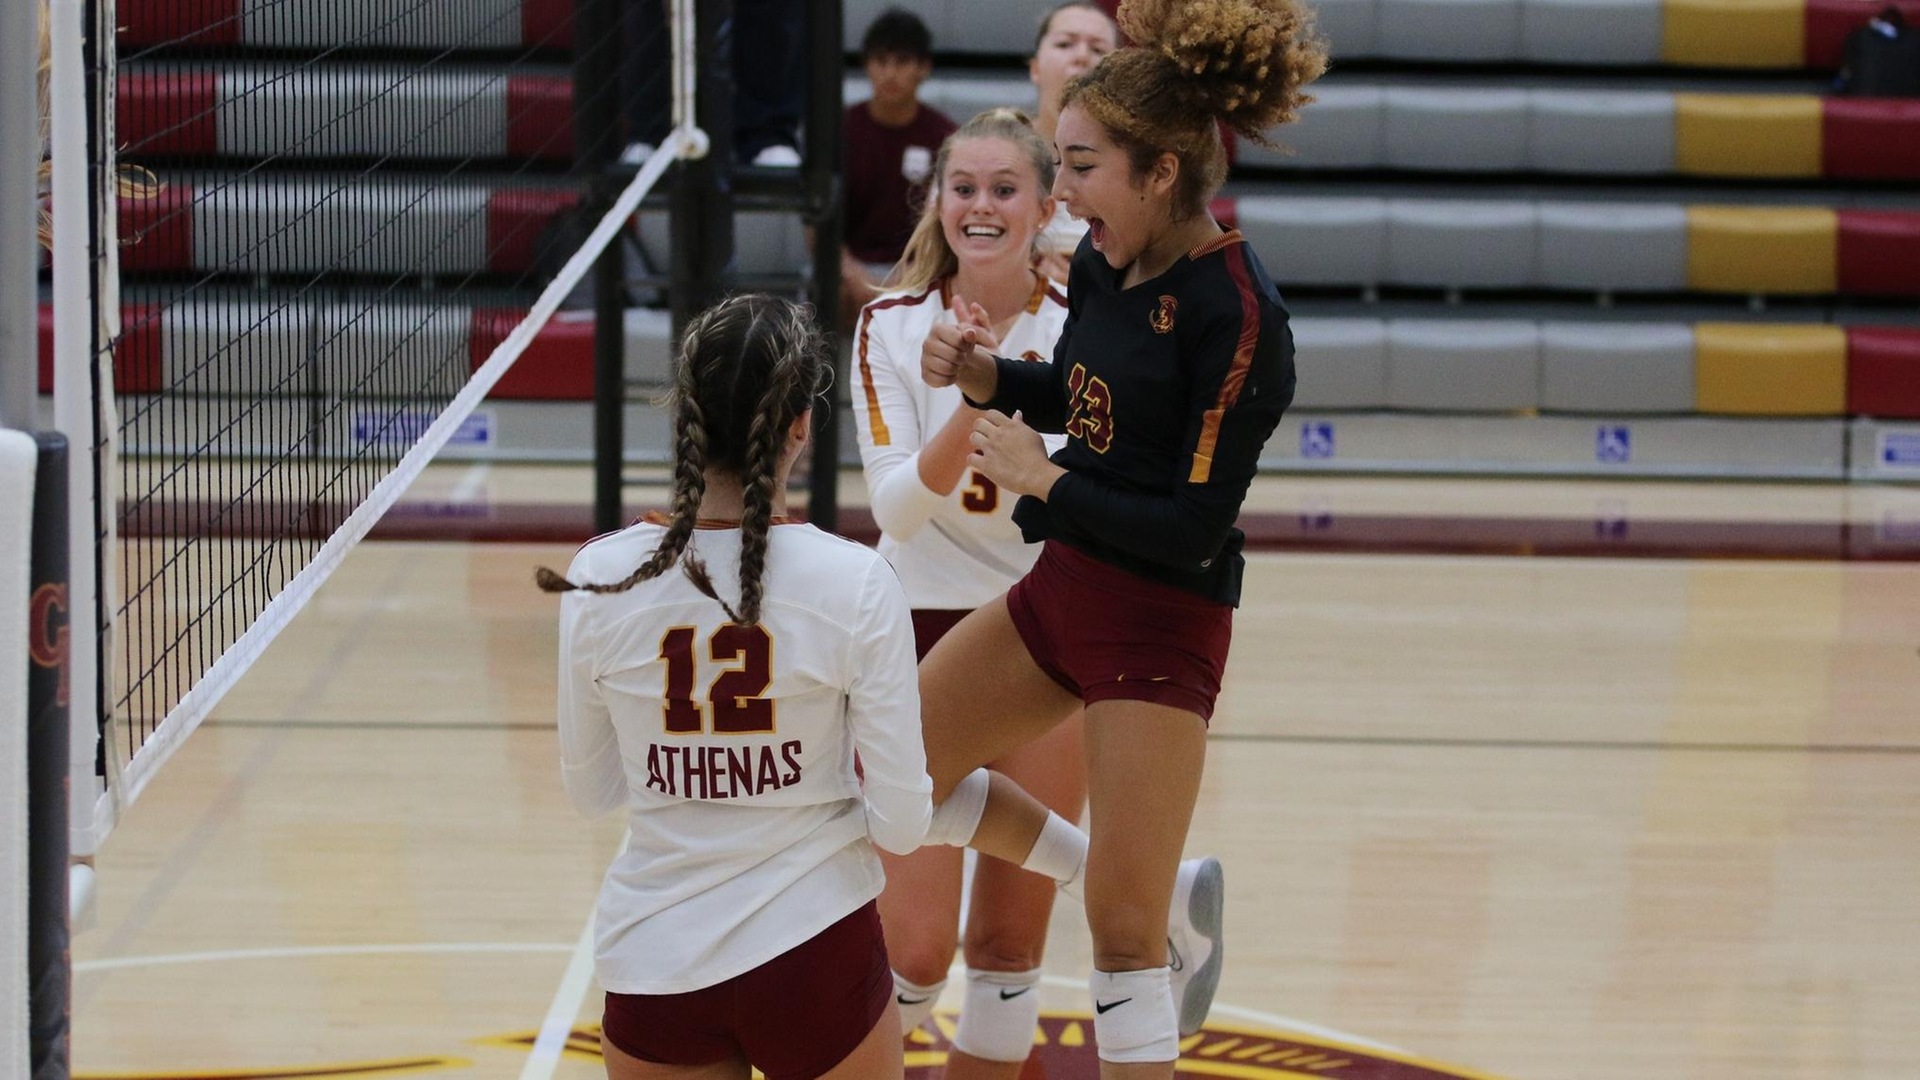 The Athenas had lots to celebrate in a 4-0 opening weekend (photo by Eva Fernandez)